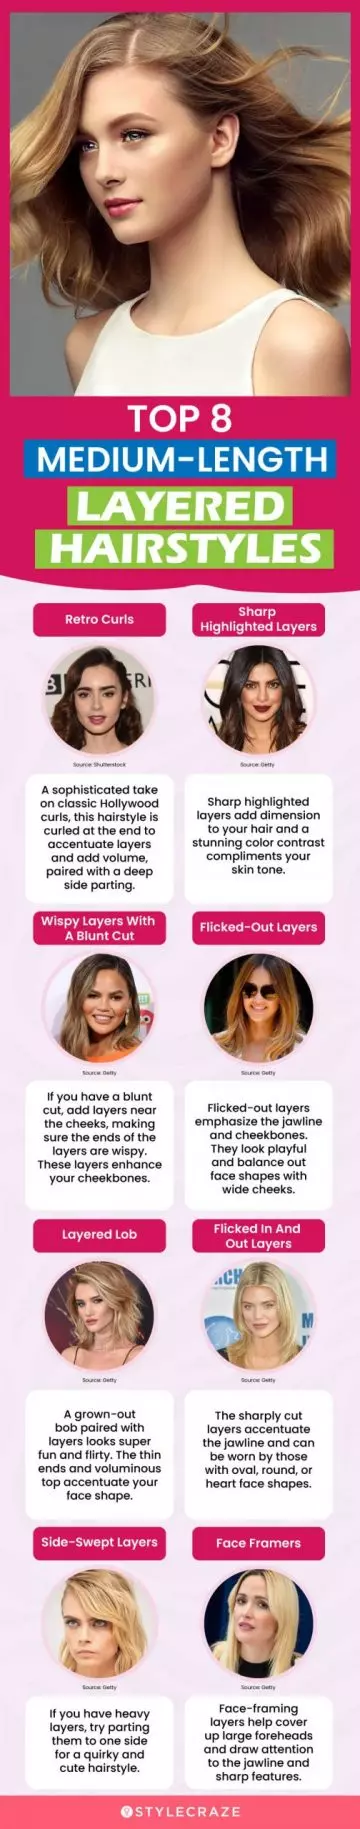 top 8 medium length layered hairstyles(infographic)